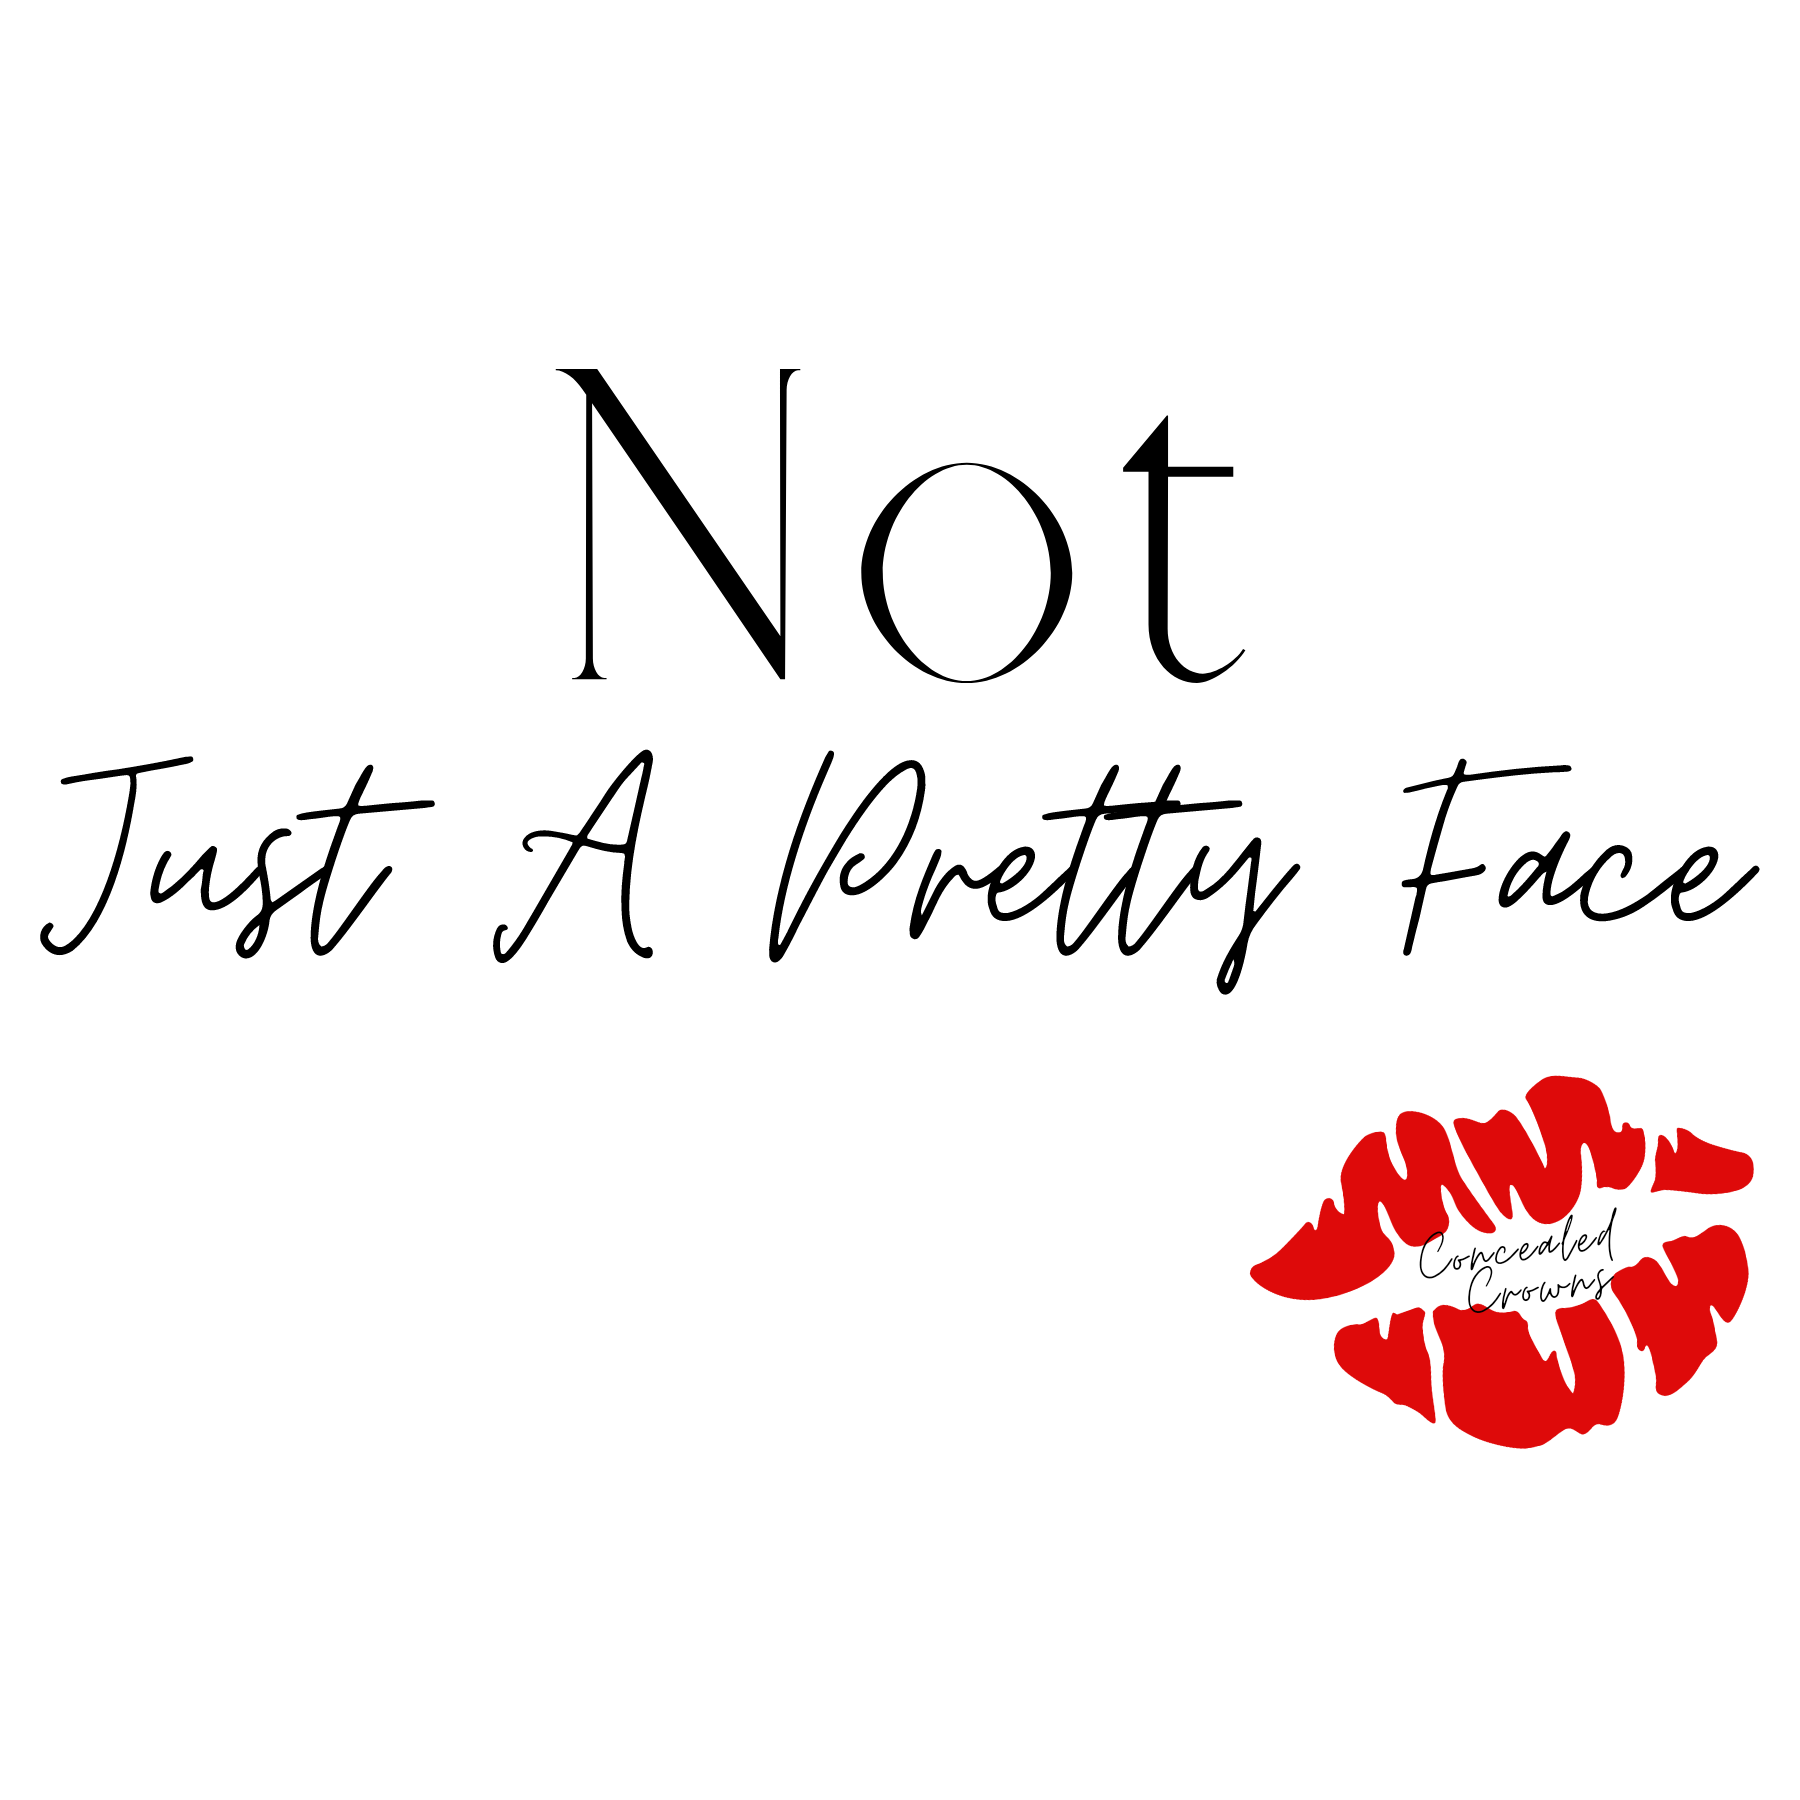 Not Just a Pretty Face